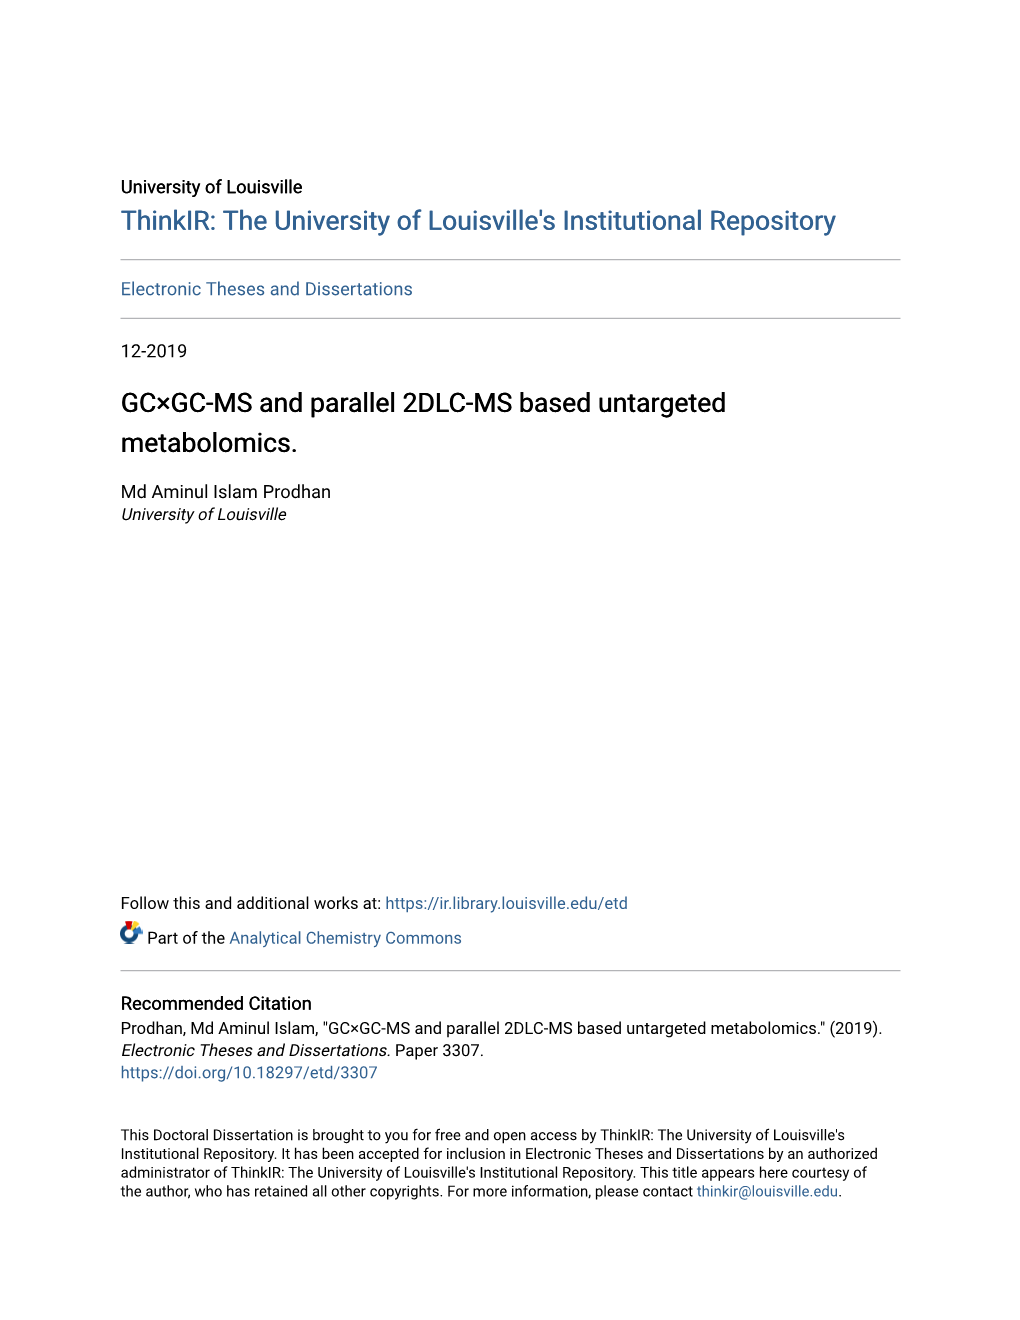 GC×GC-MS and Parallel 2DLC-MS Based Untargeted Metabolomics